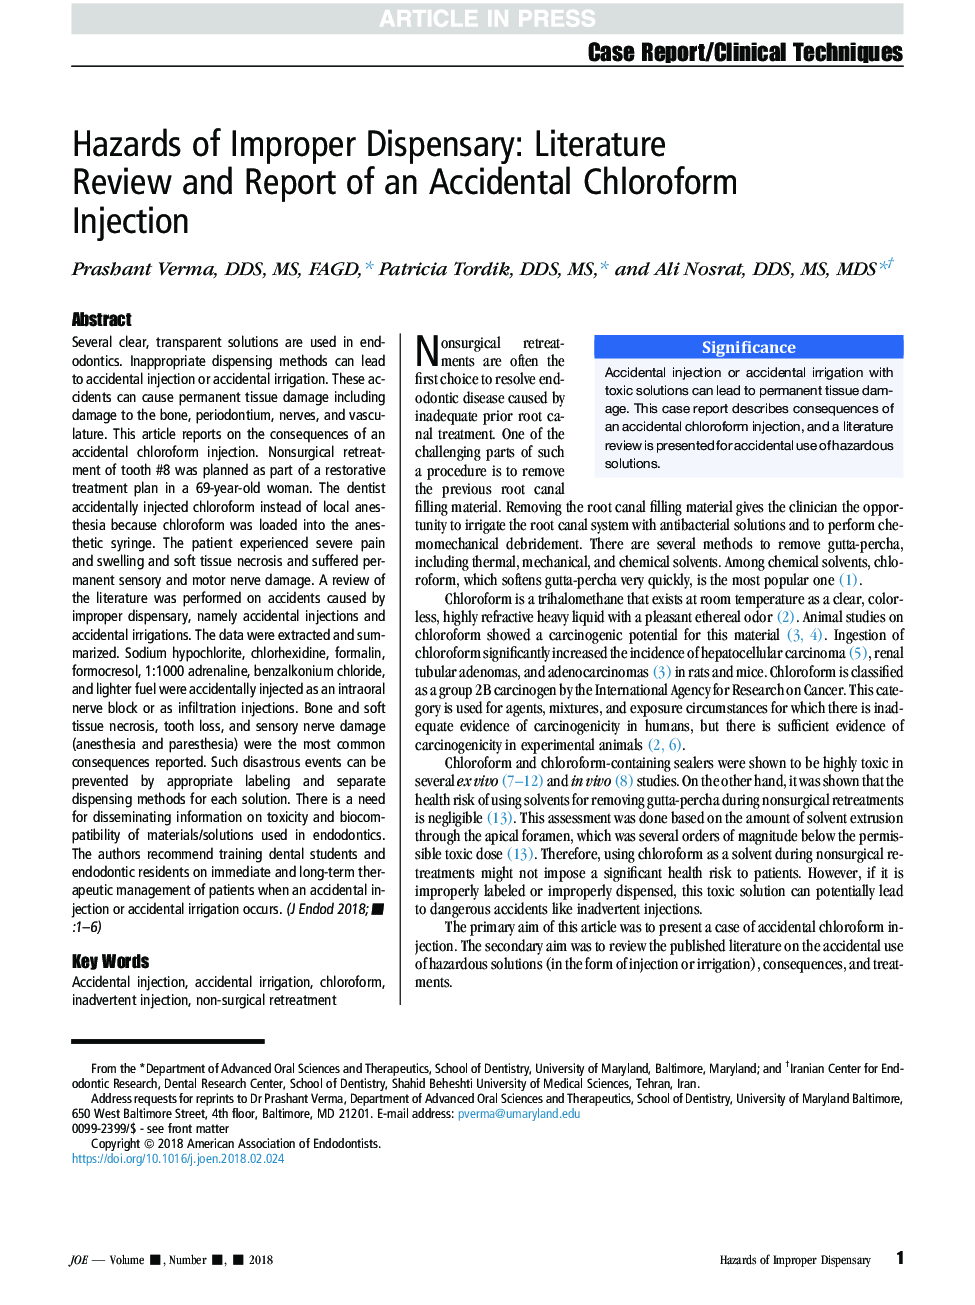 Hazards of Improper Dispensary: Literature Review and Report of an Accidental Chloroform Injection